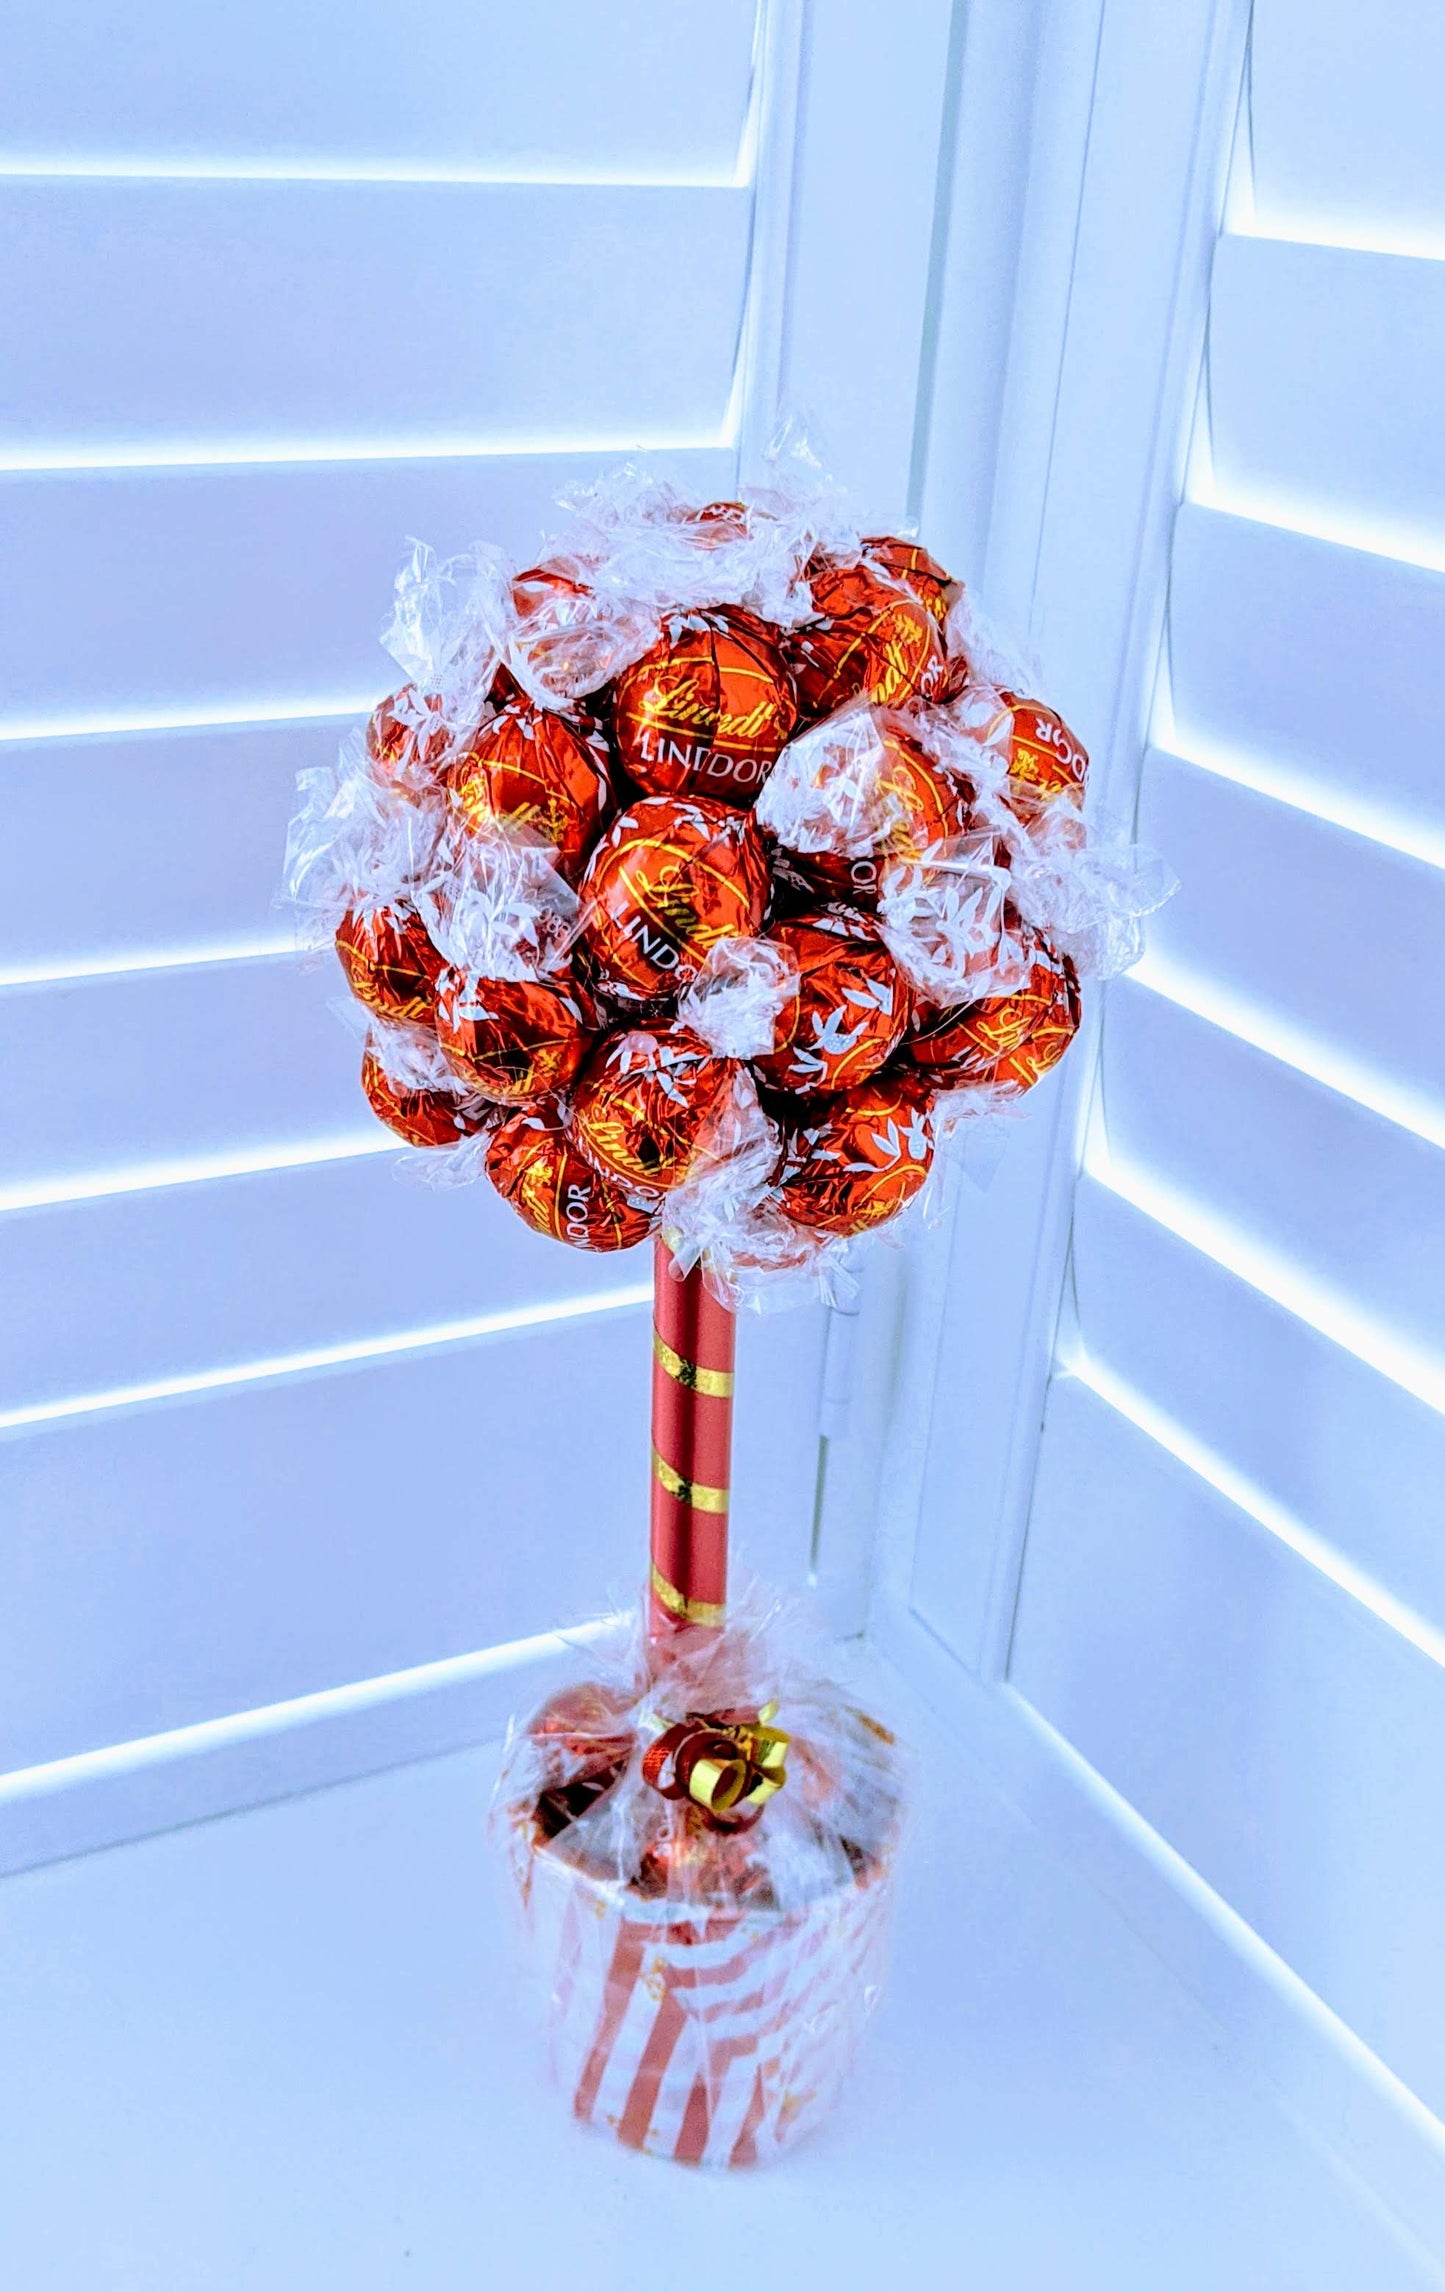 Lindt Sweet Tree with personalised message for your best one